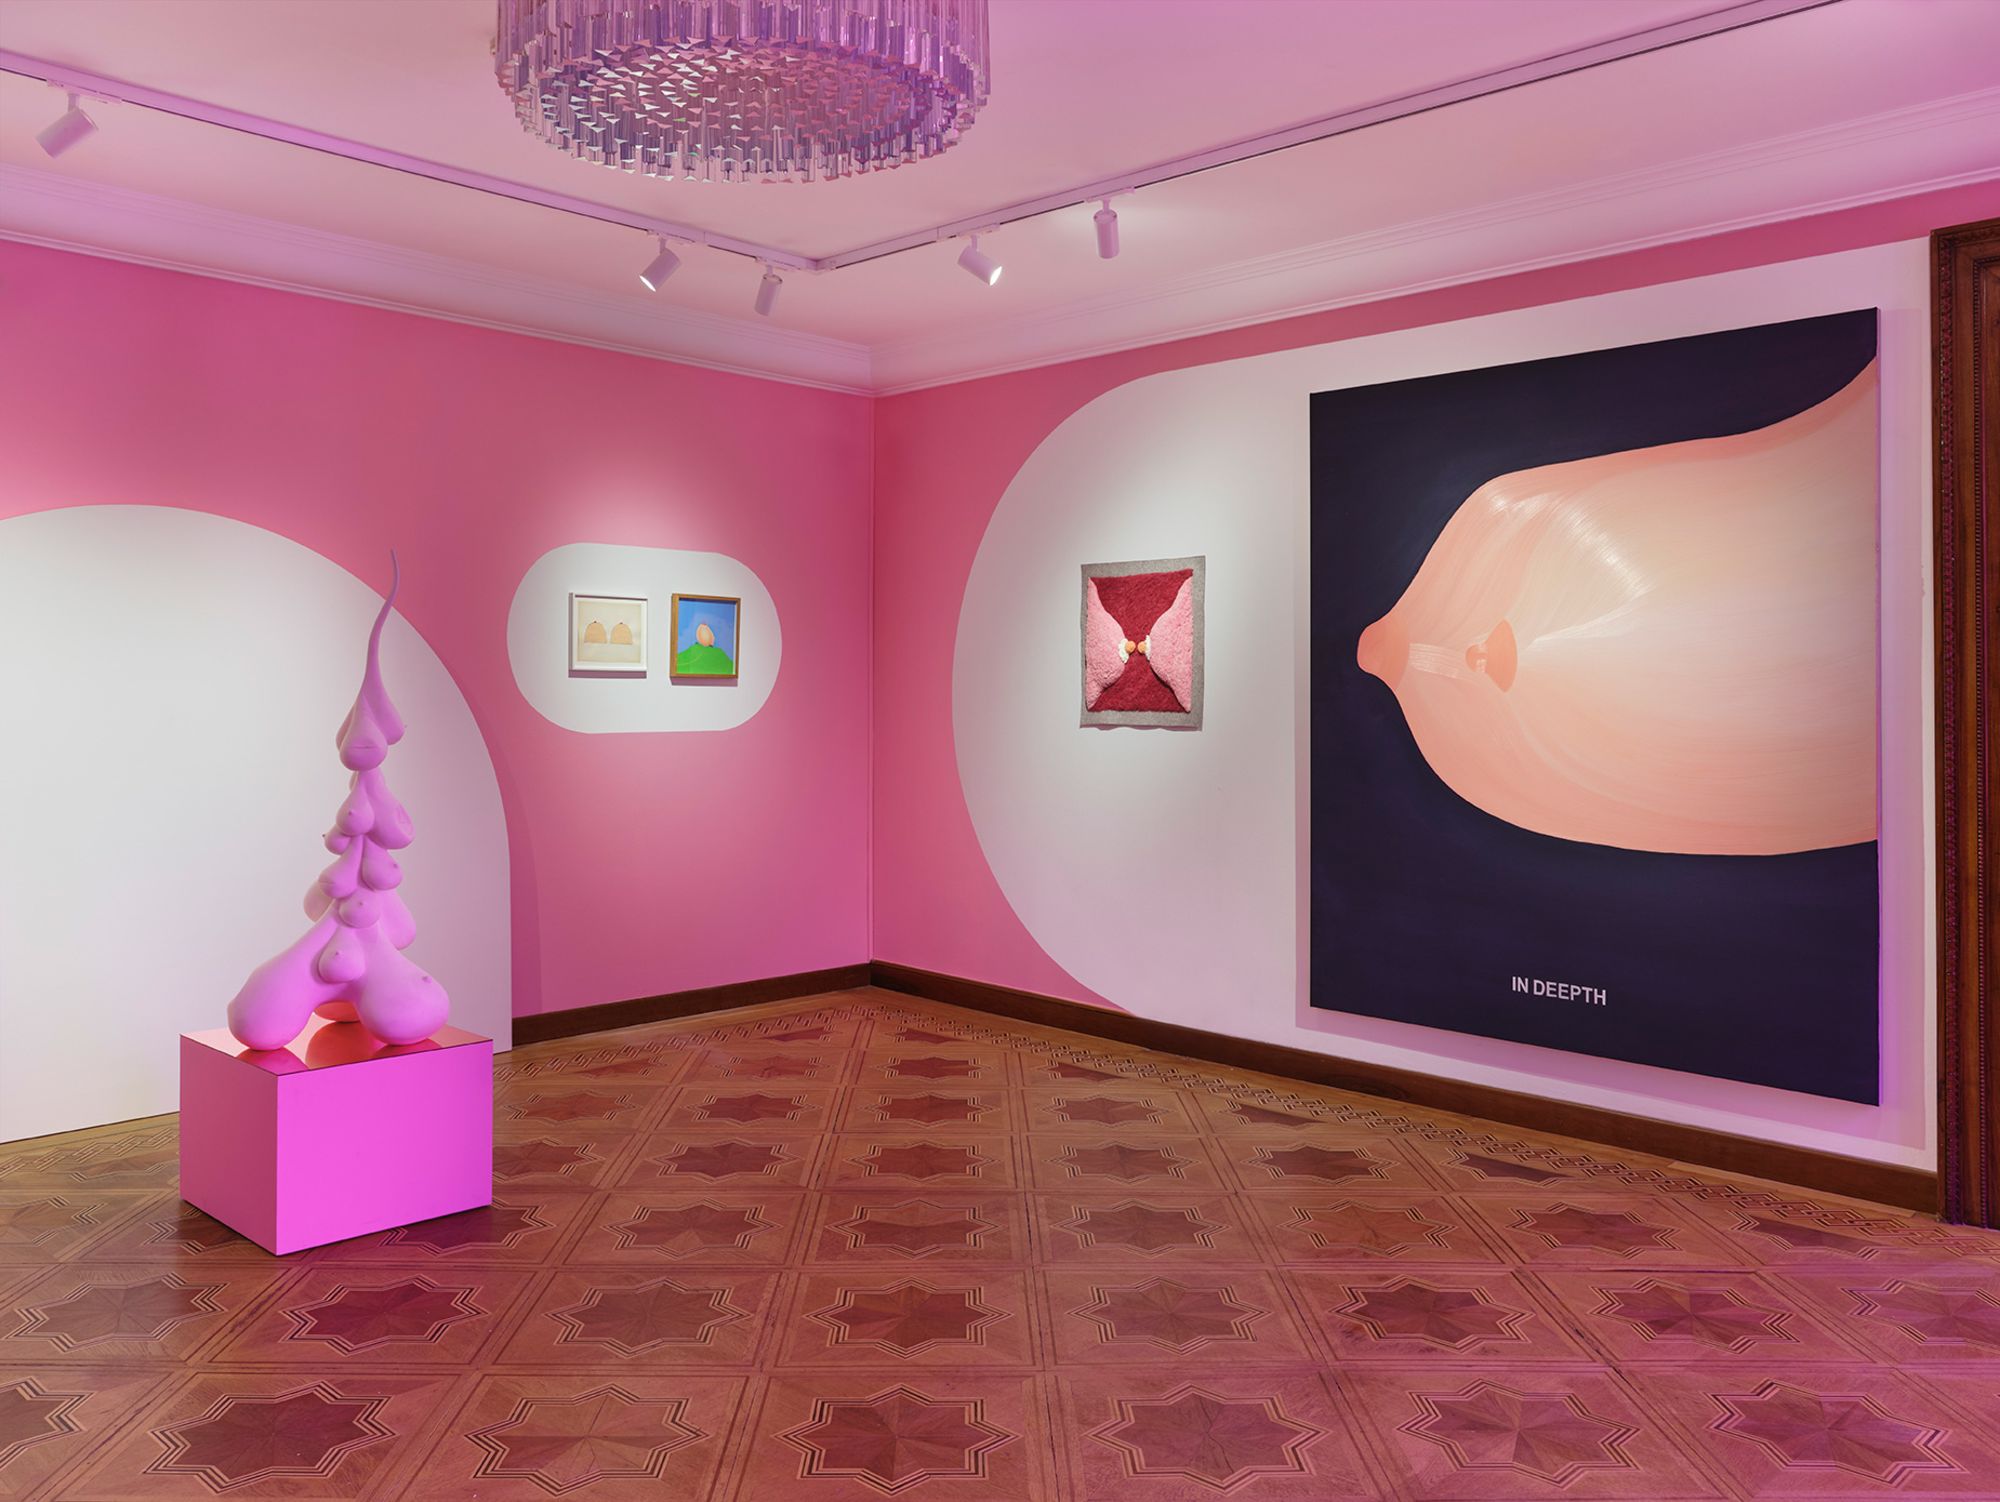 "Breasts" runs from April to November at the 60th Venice Biennale international art exhibition.